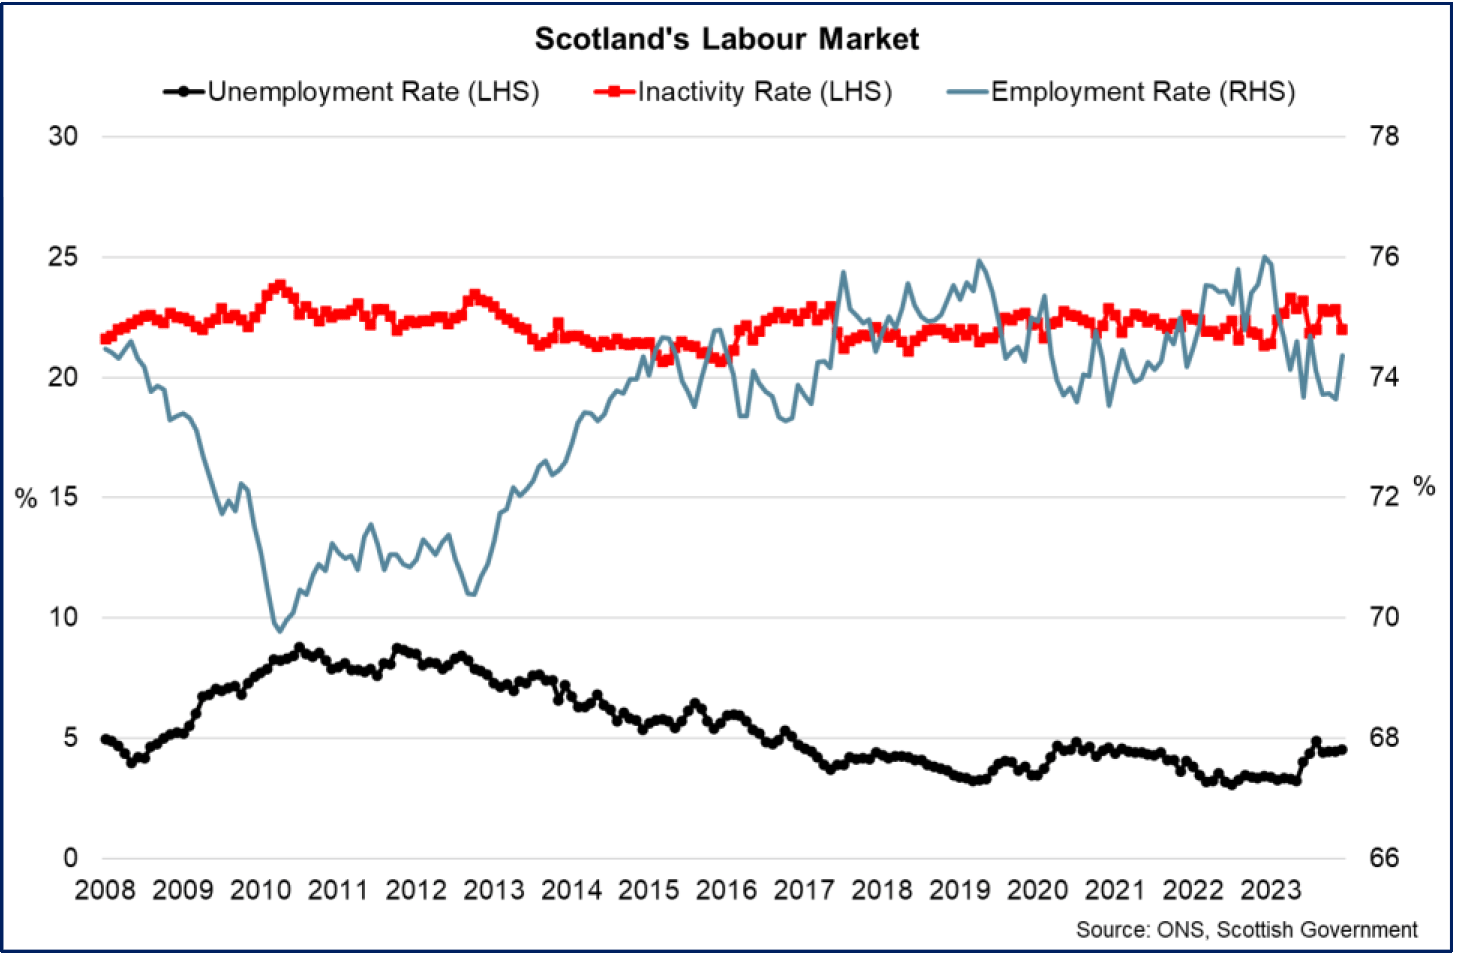 latest data showing Scotland’s unemployment rate has increased over the quarter to 4.5% while the employment rate rose to 74.4% and inactivity rate fell to 22%